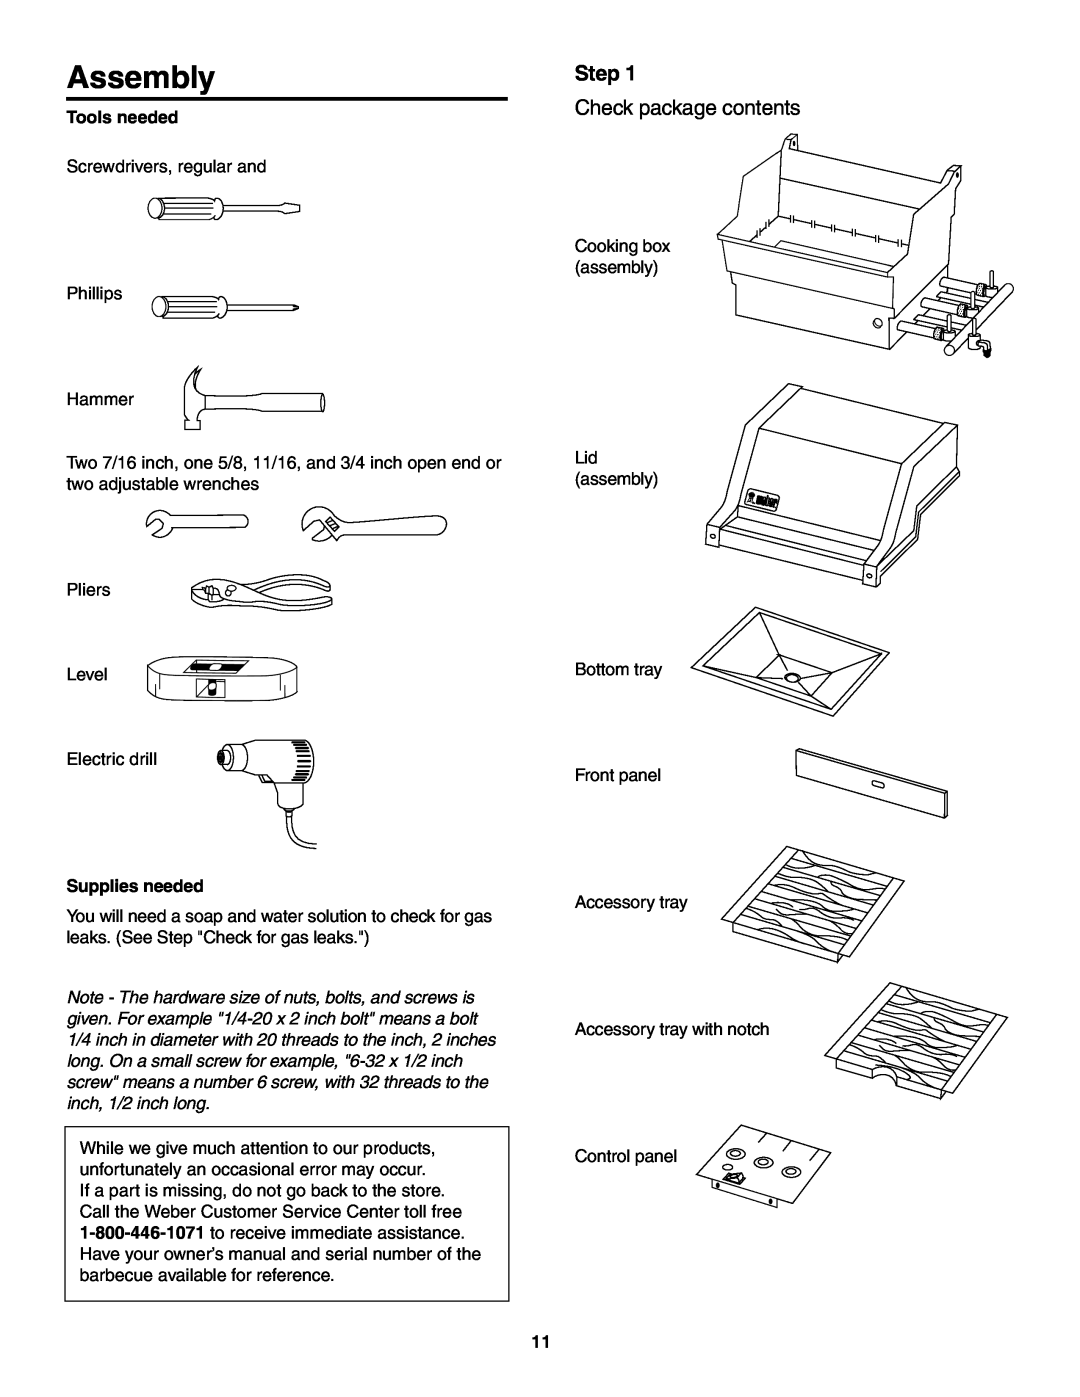 Weber 5500 owner manual Assembly, Step, Check package contents 